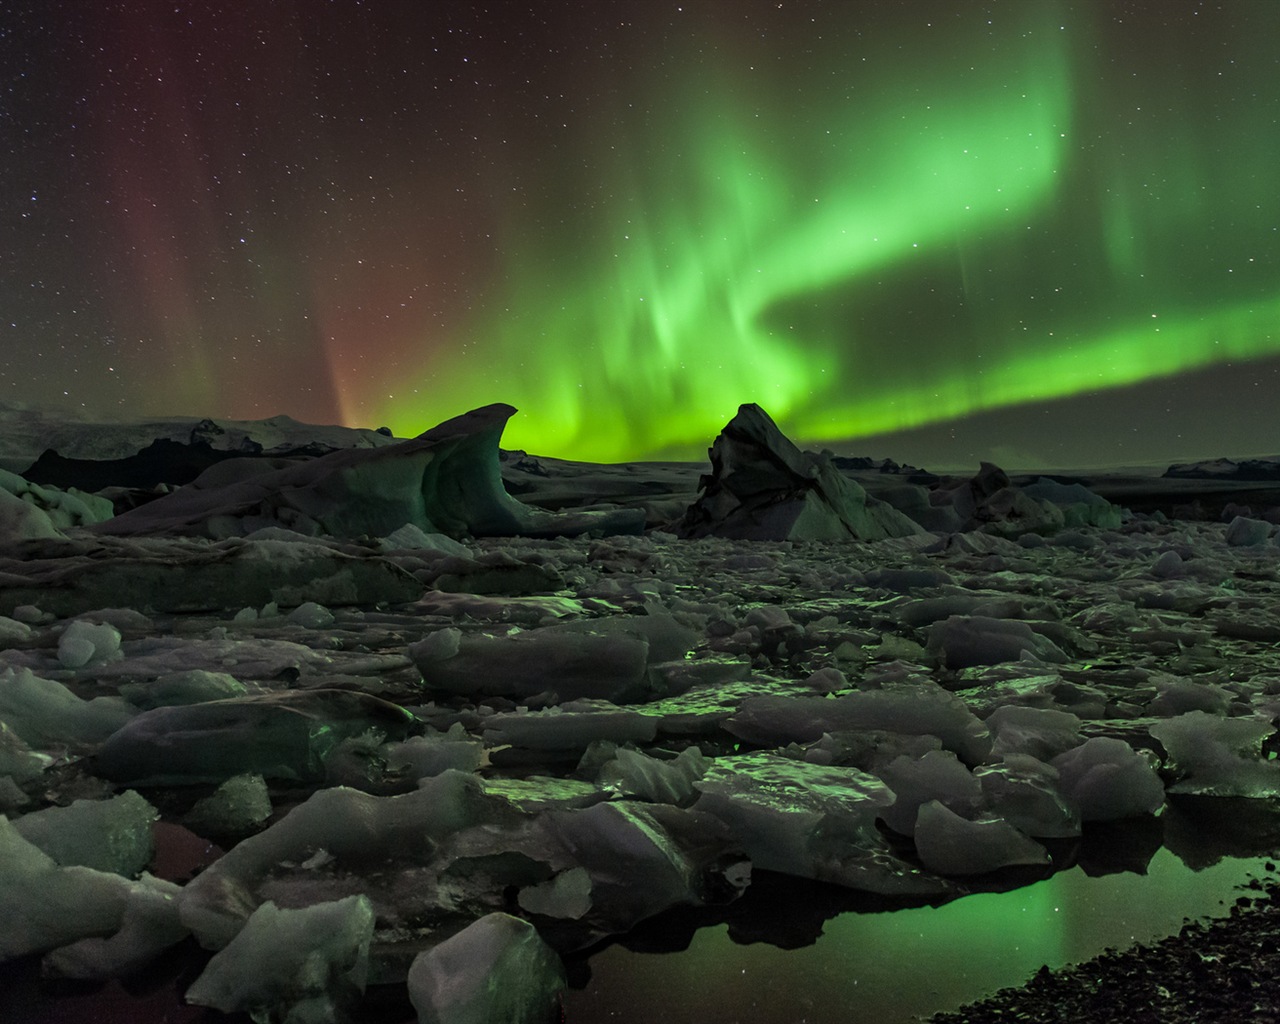 Natural wonders of the Northern Lights HD Wallpaper (1) #17 - 1280x1024